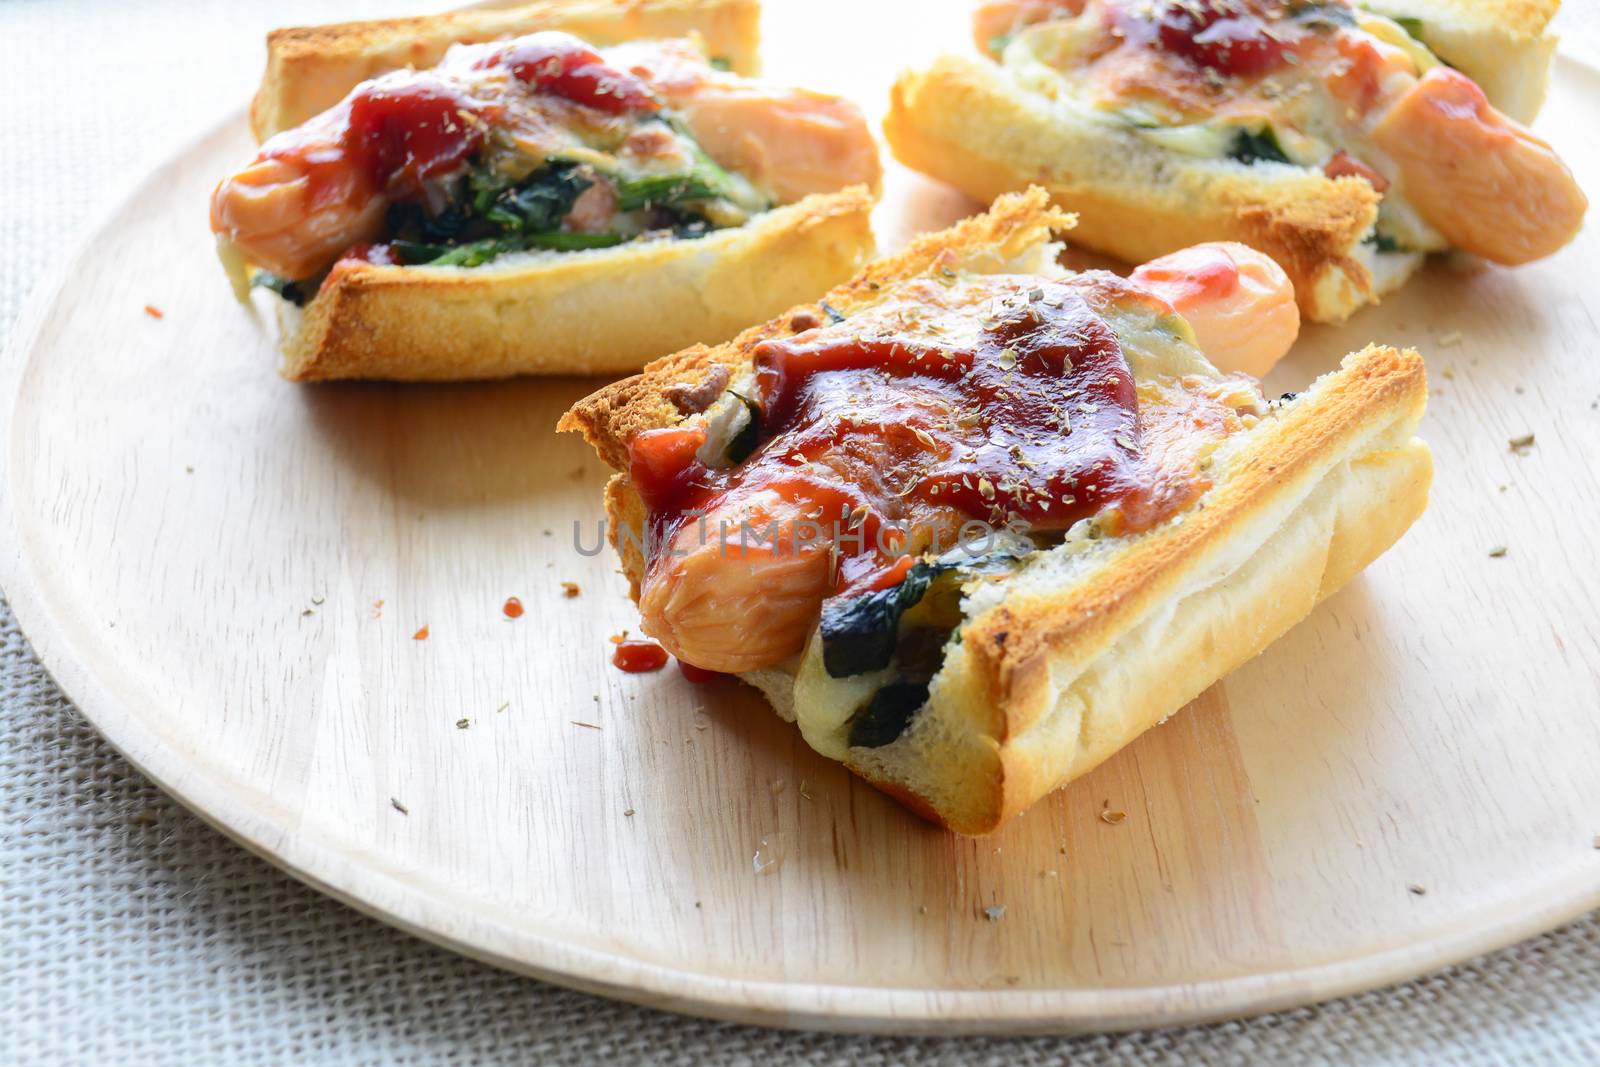 Baked Spinach with Cheese, sausage on Baguette, French bread by yuiyuize